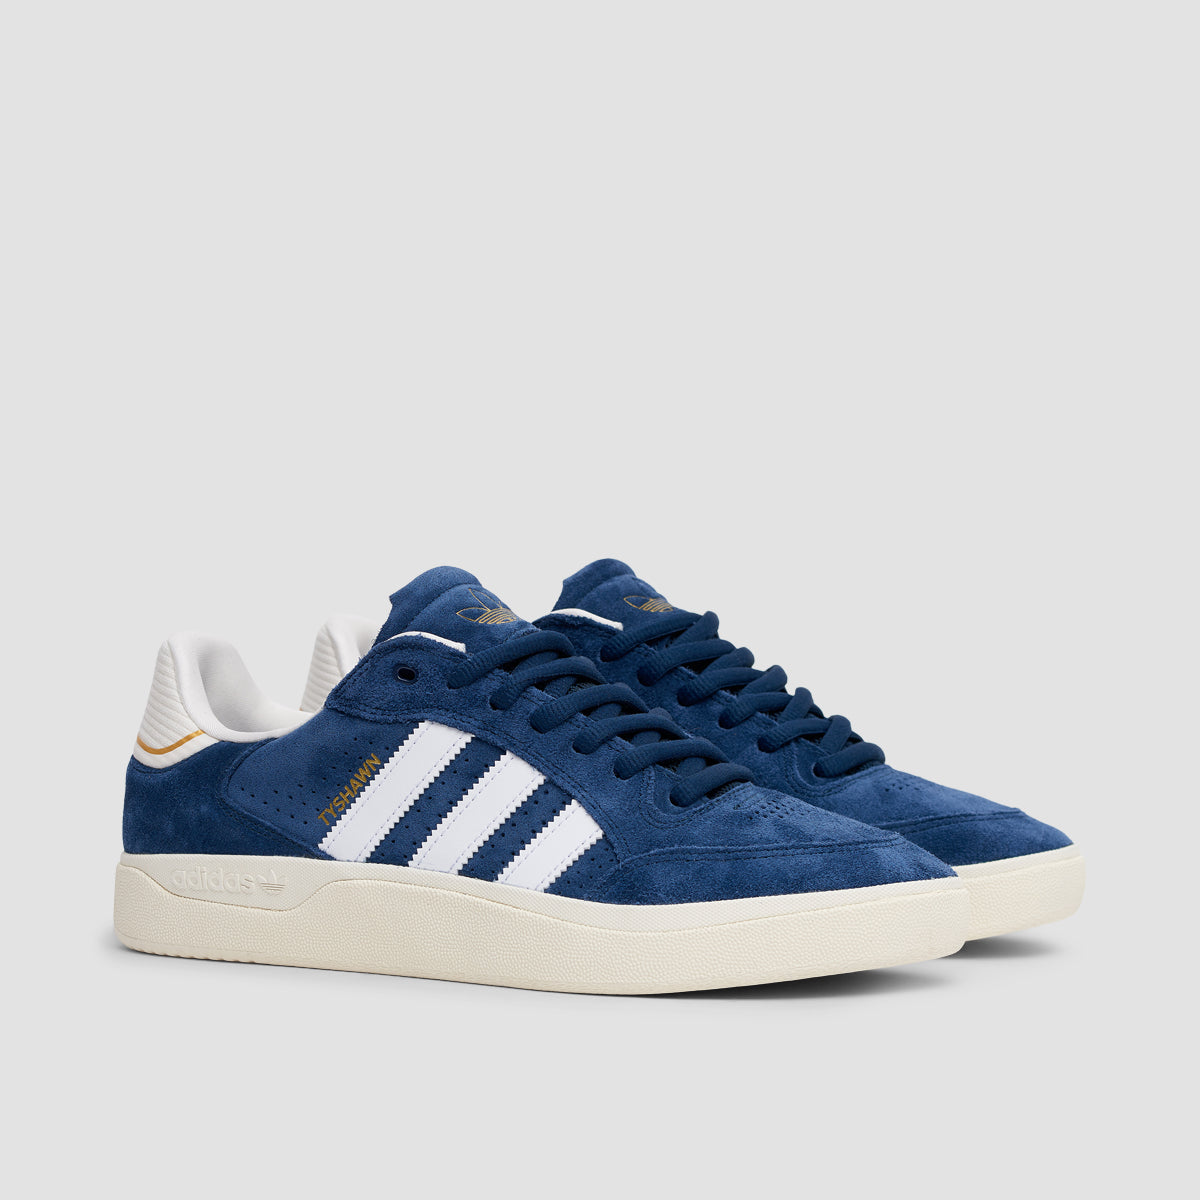 adidas Tyshawn Low Shoes - Collegiate Navy/Footwear White/Core white